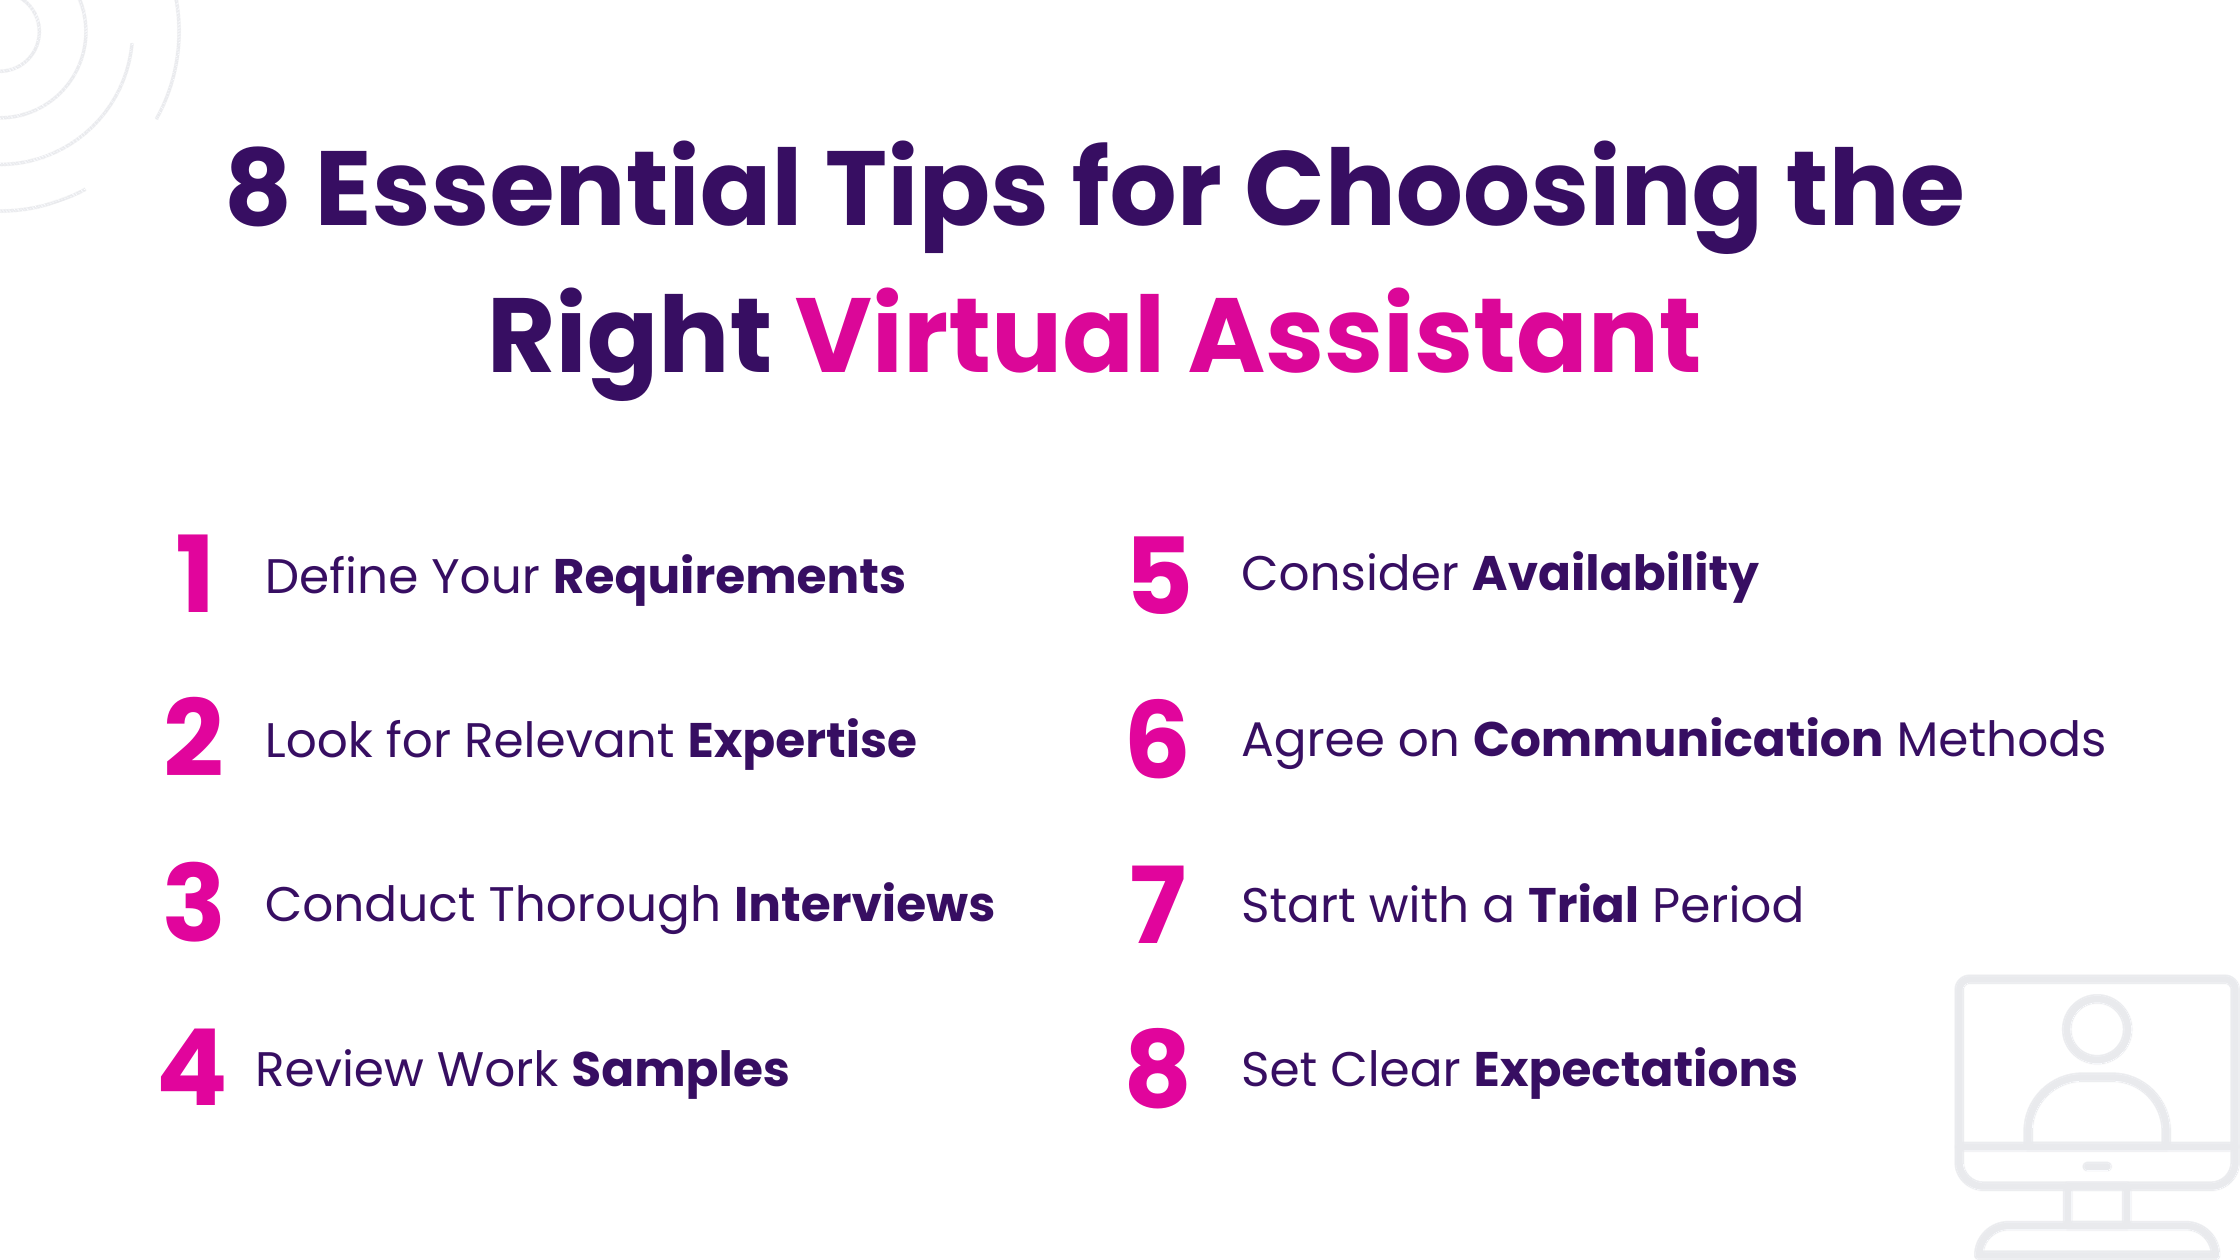 8 Essential Tips for Choosing the Right Virtual Assistant